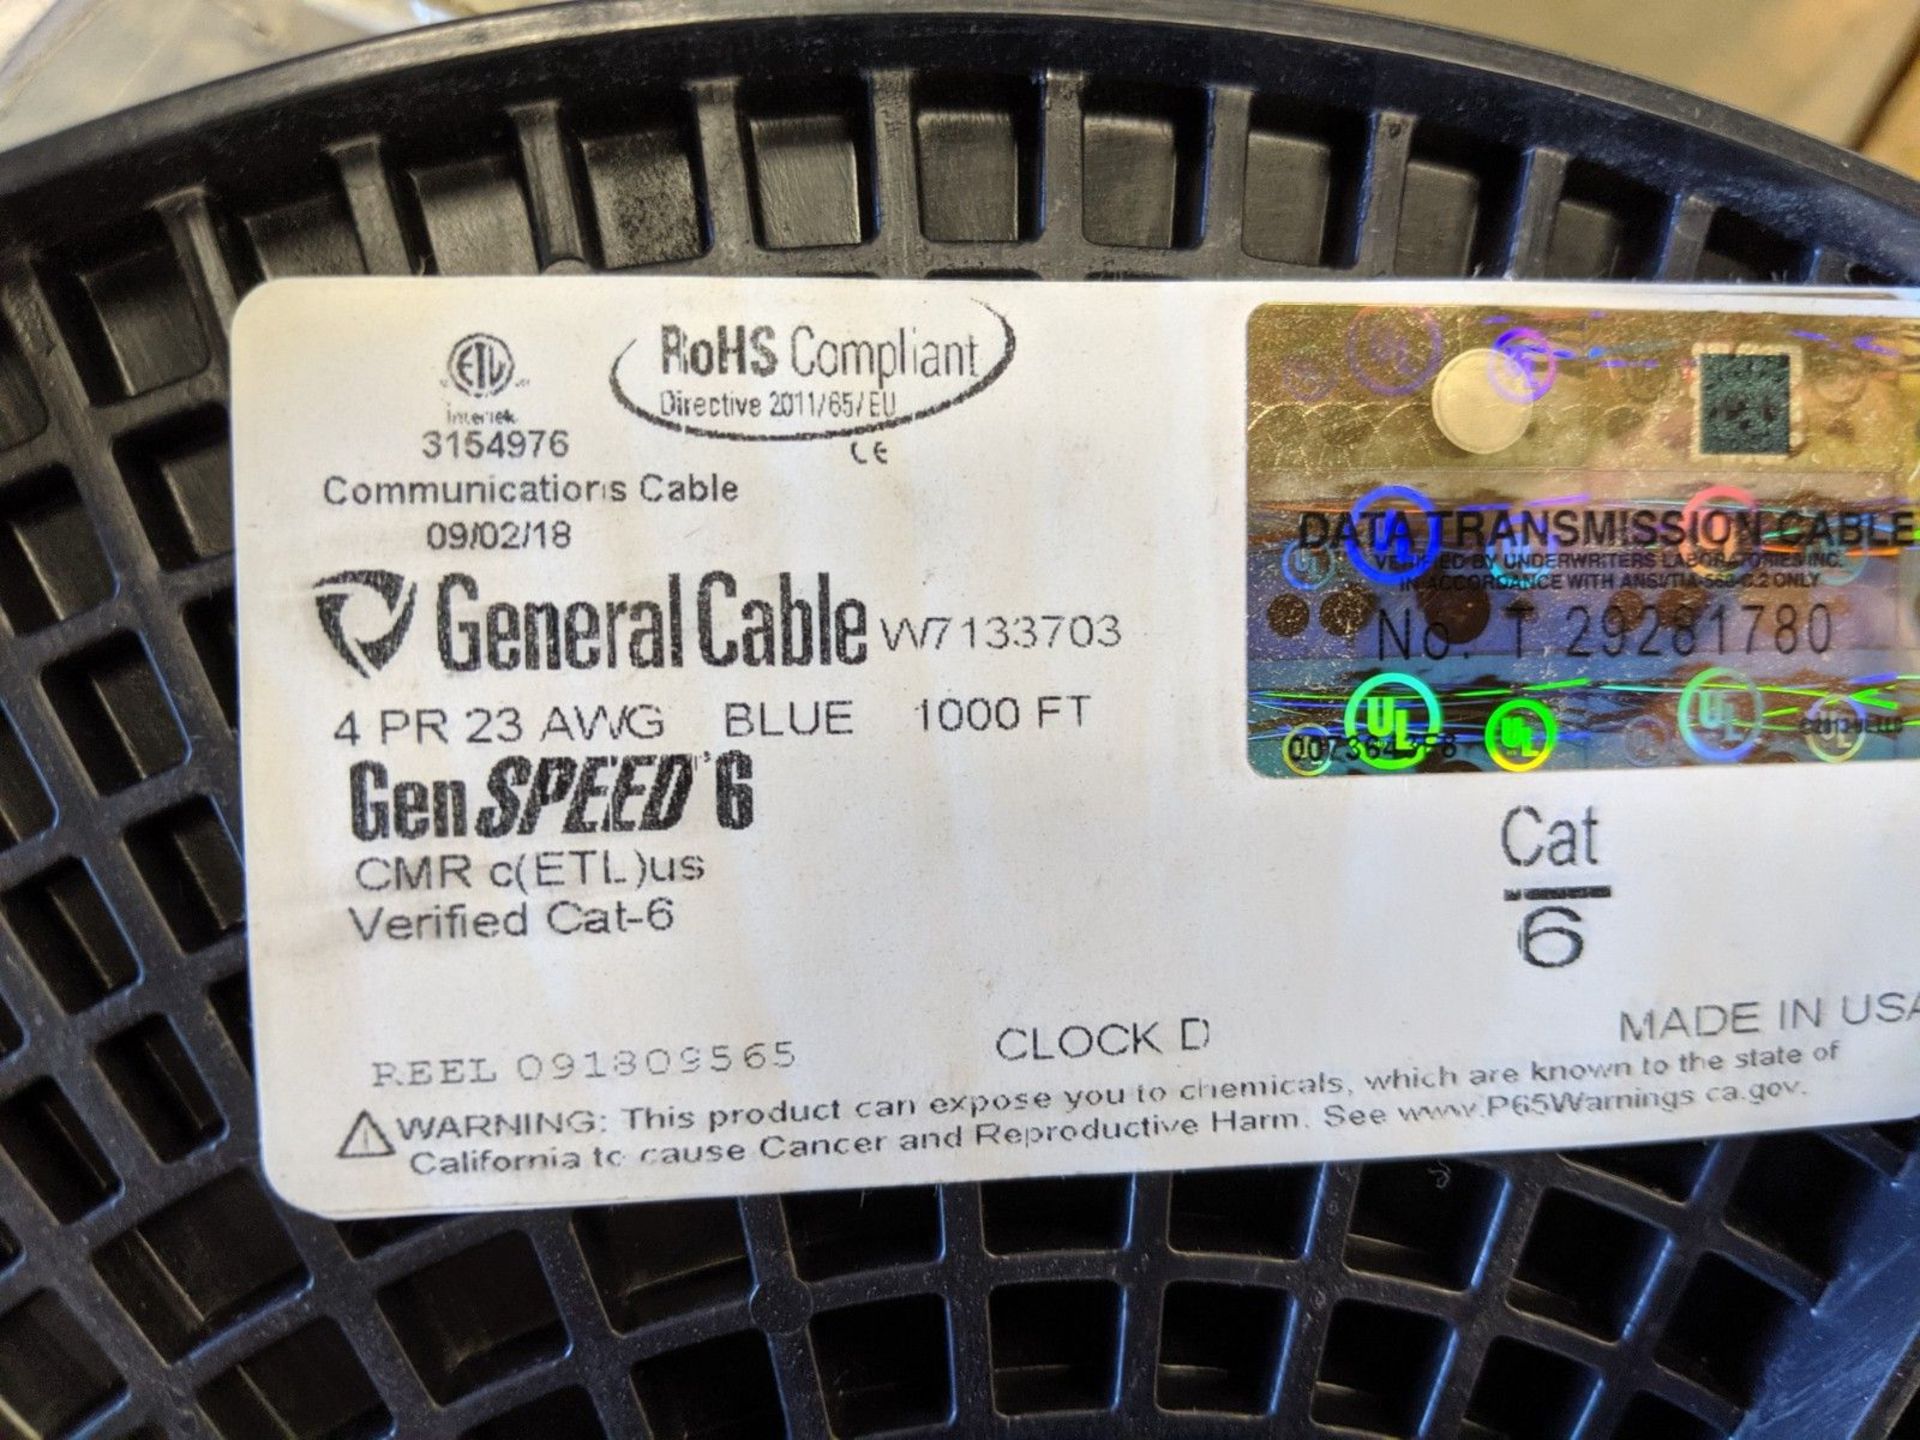 (LOT) 500' REEL COAXIL CABLE AND 1000' CAT 6 DATA TRANSMISSION WIRE - Image 3 of 3